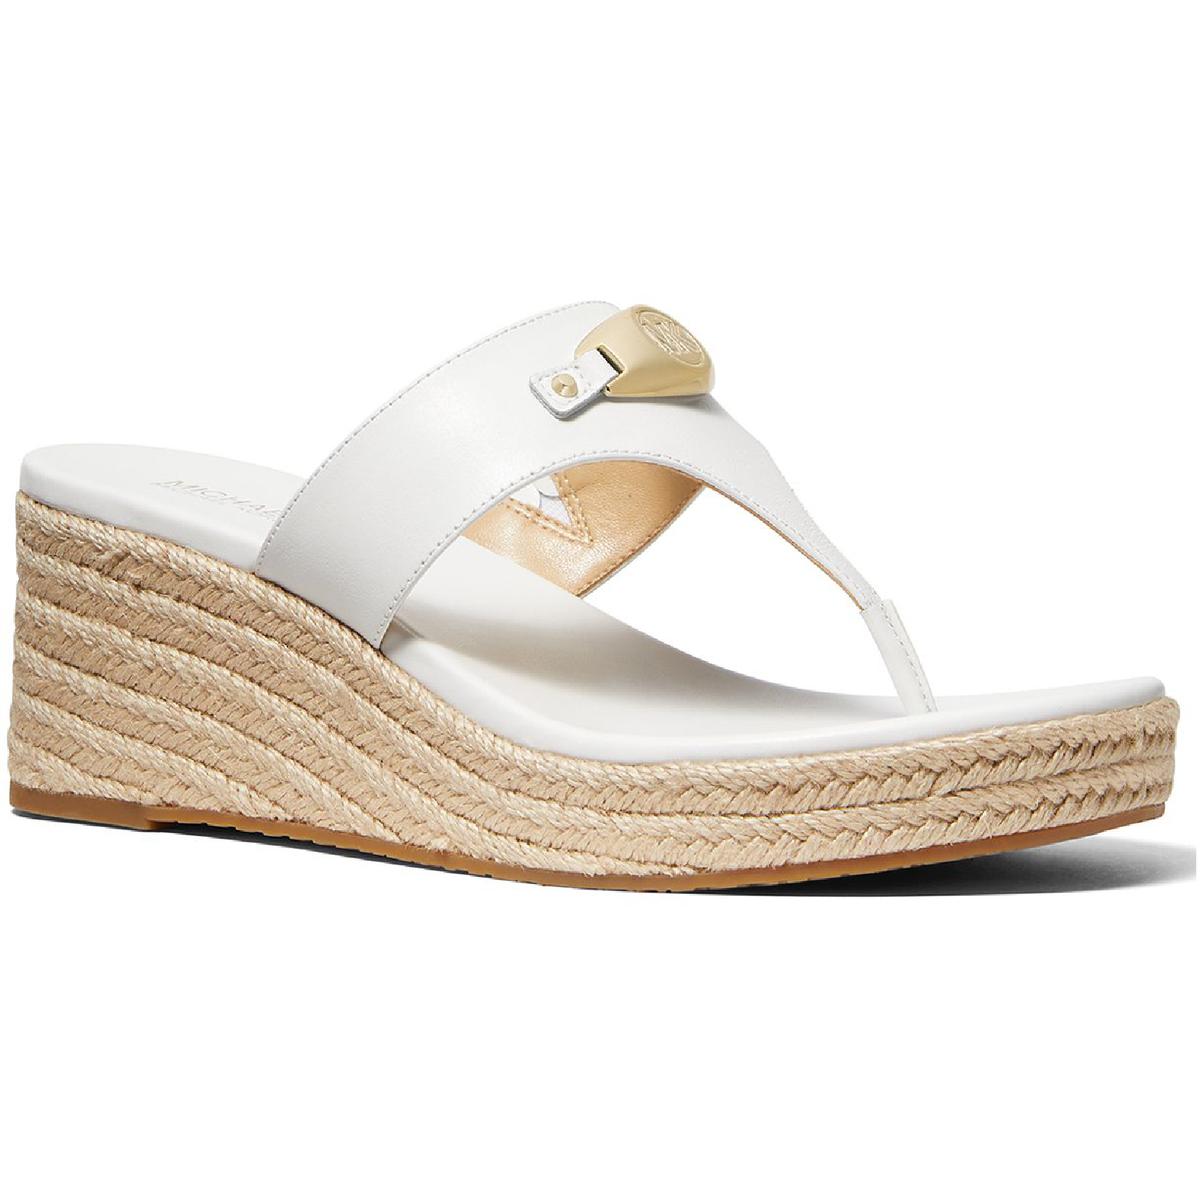 Michael Kors Tilly Womens Leather Slides Thong Sandals